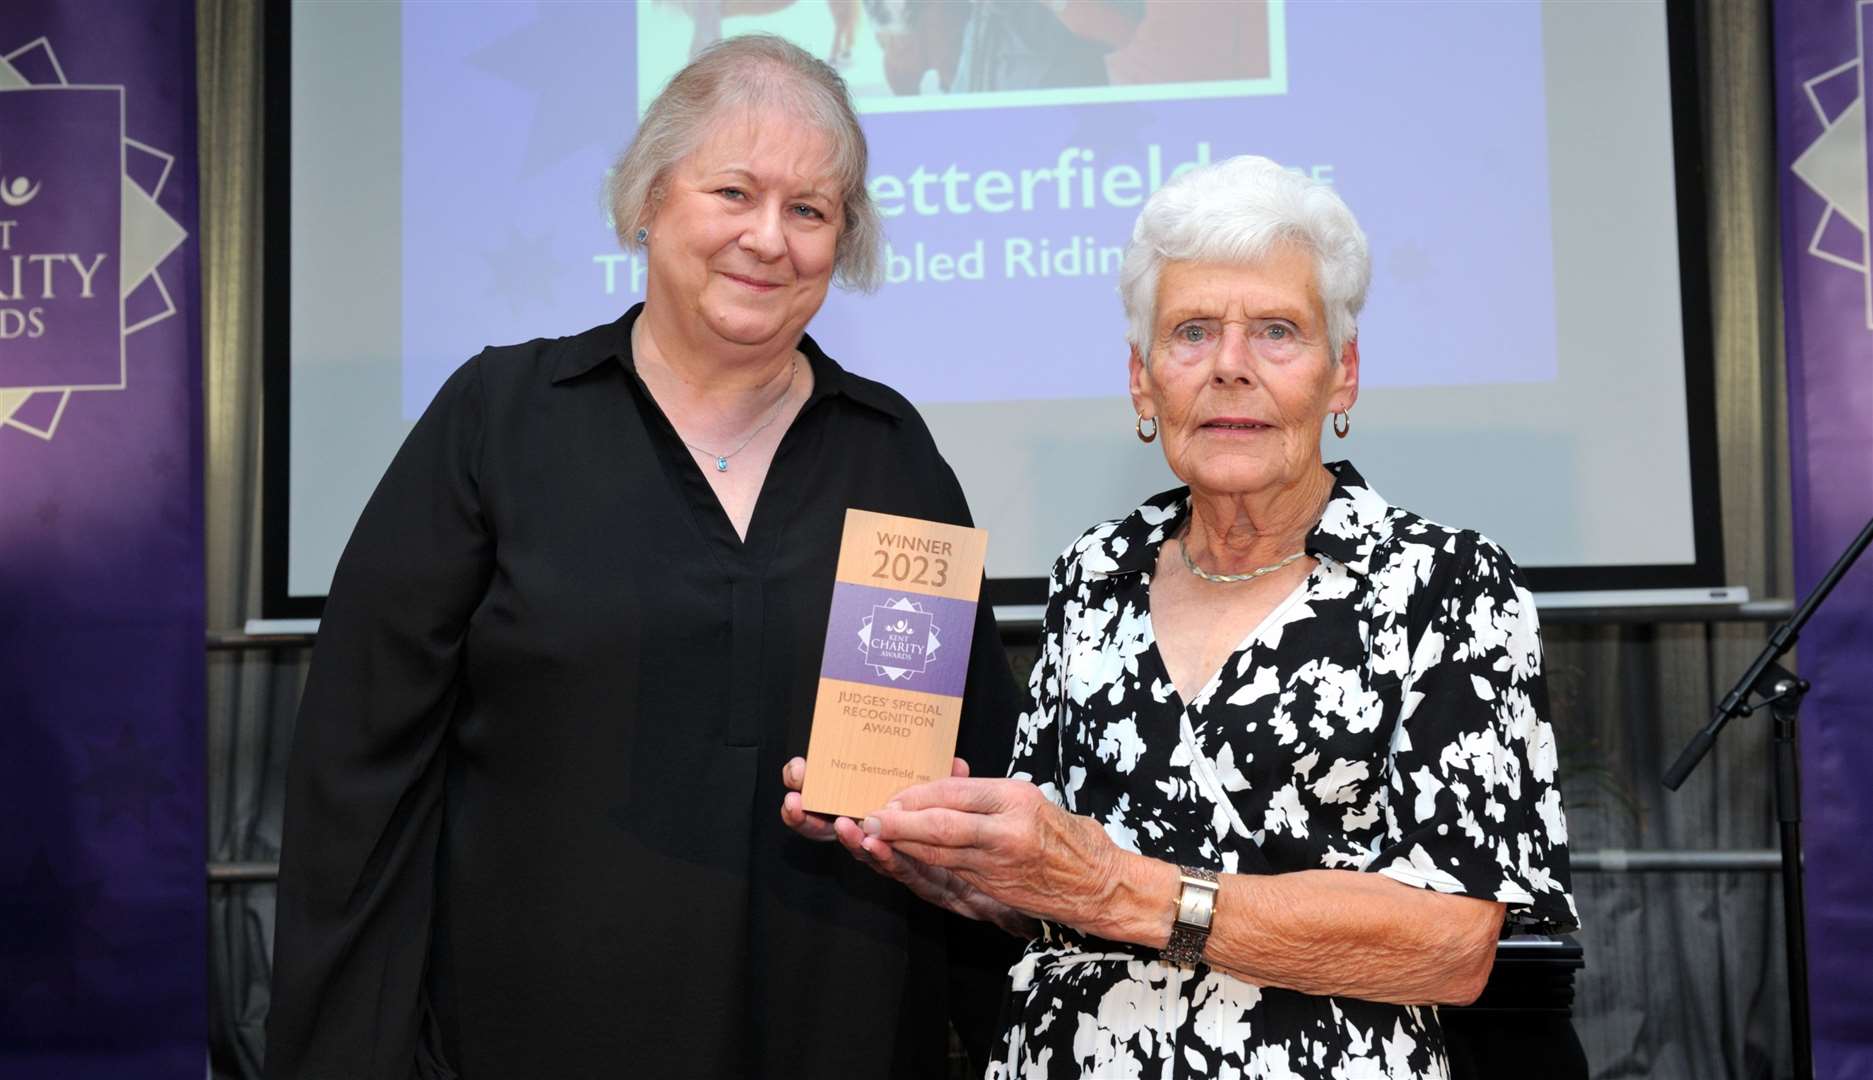 Special award recipient Nora Setterfield has worked with Thanet Riding Stables for more than 50 years. Picture: Simon Hildrew